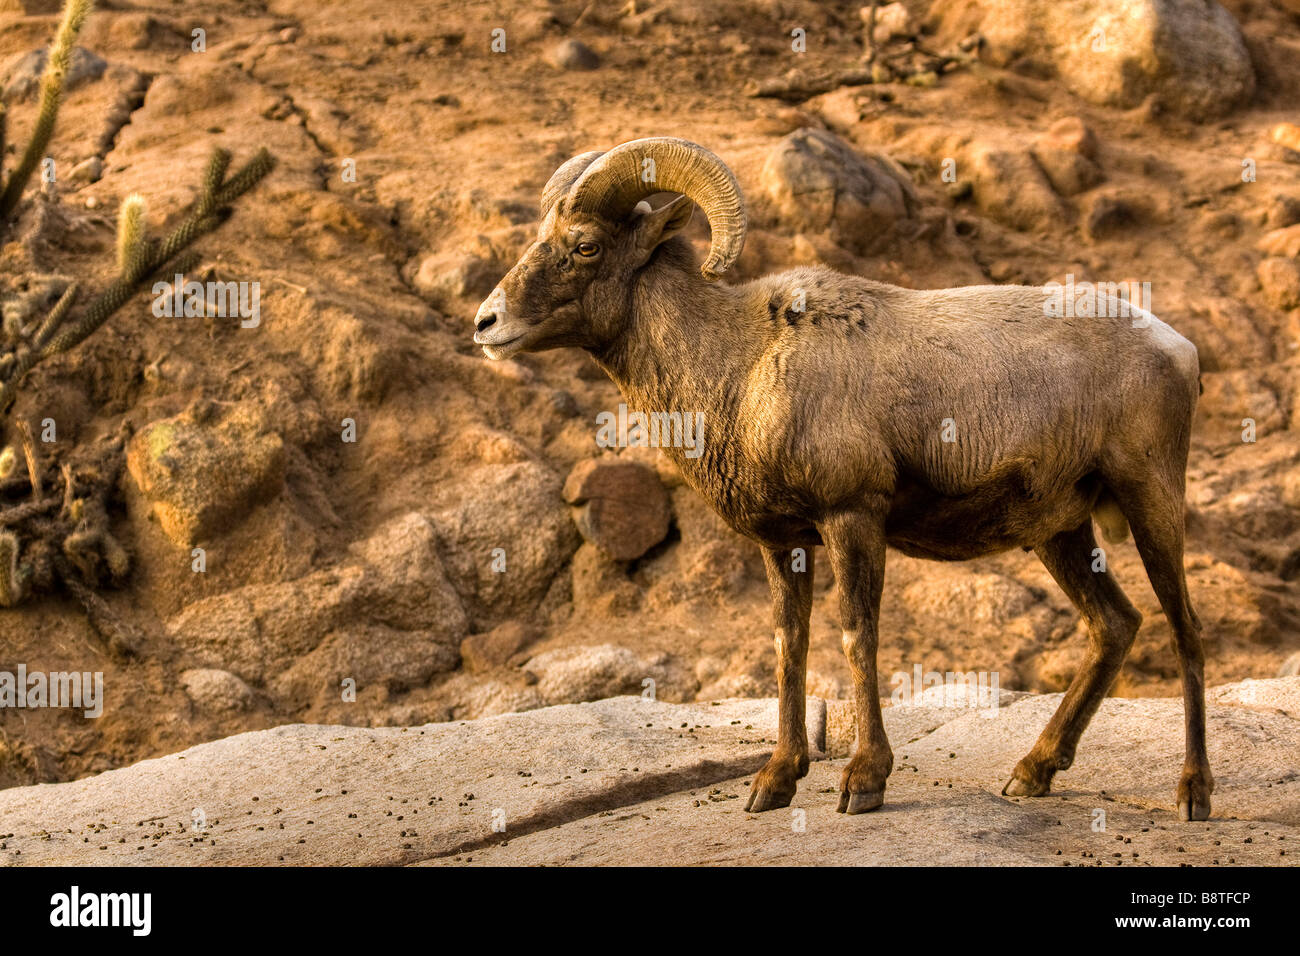 North American Big Horn Sheep Standing on Boulder Stock Photo